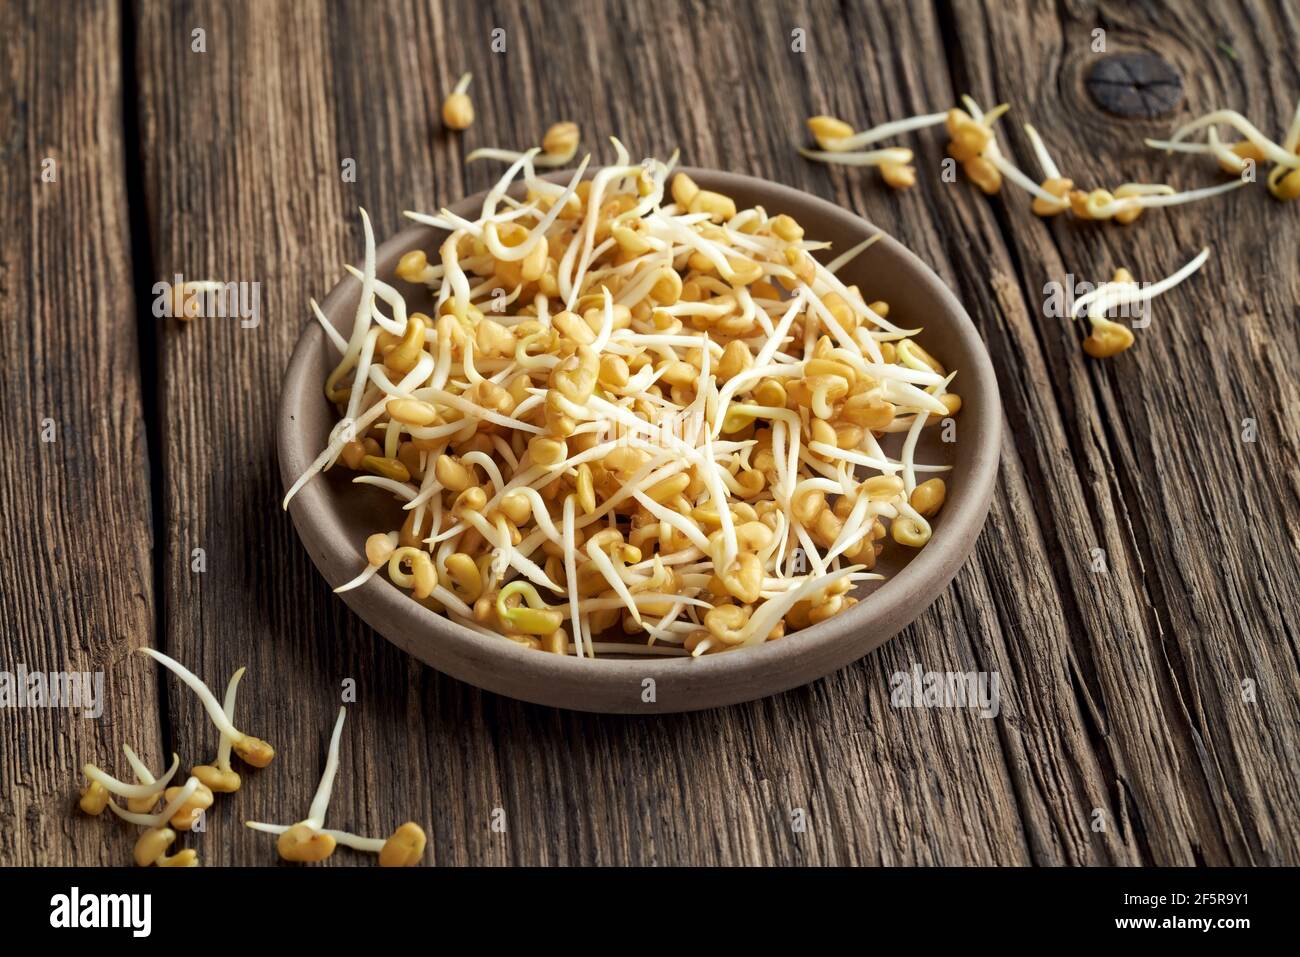 Sprouted fenugreek seeds in a bowl on a table Stock Photo